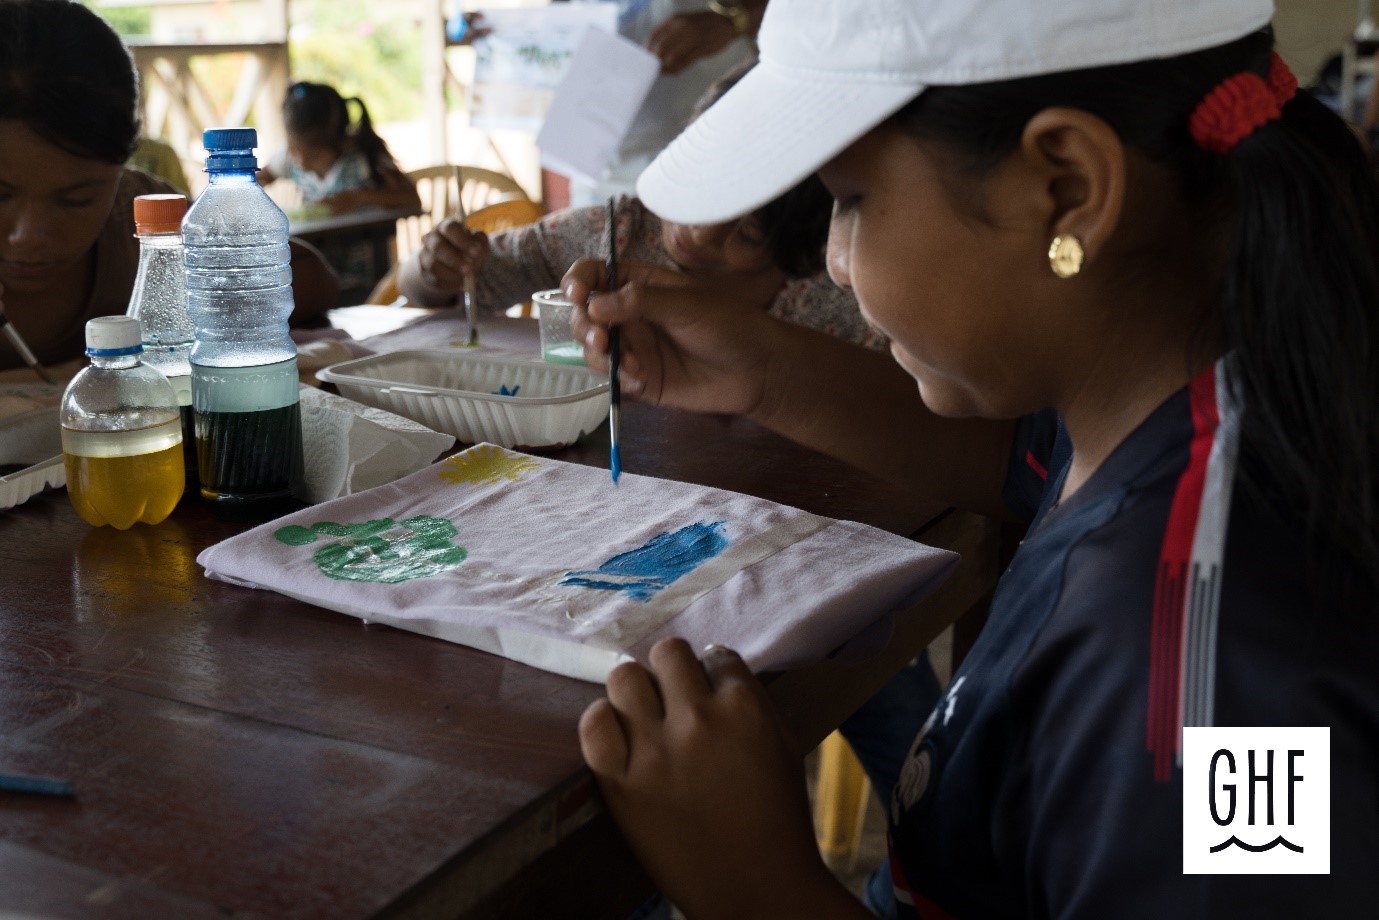 GLOBE Suriname student working on a summer vacation activity with water colors in the classroom